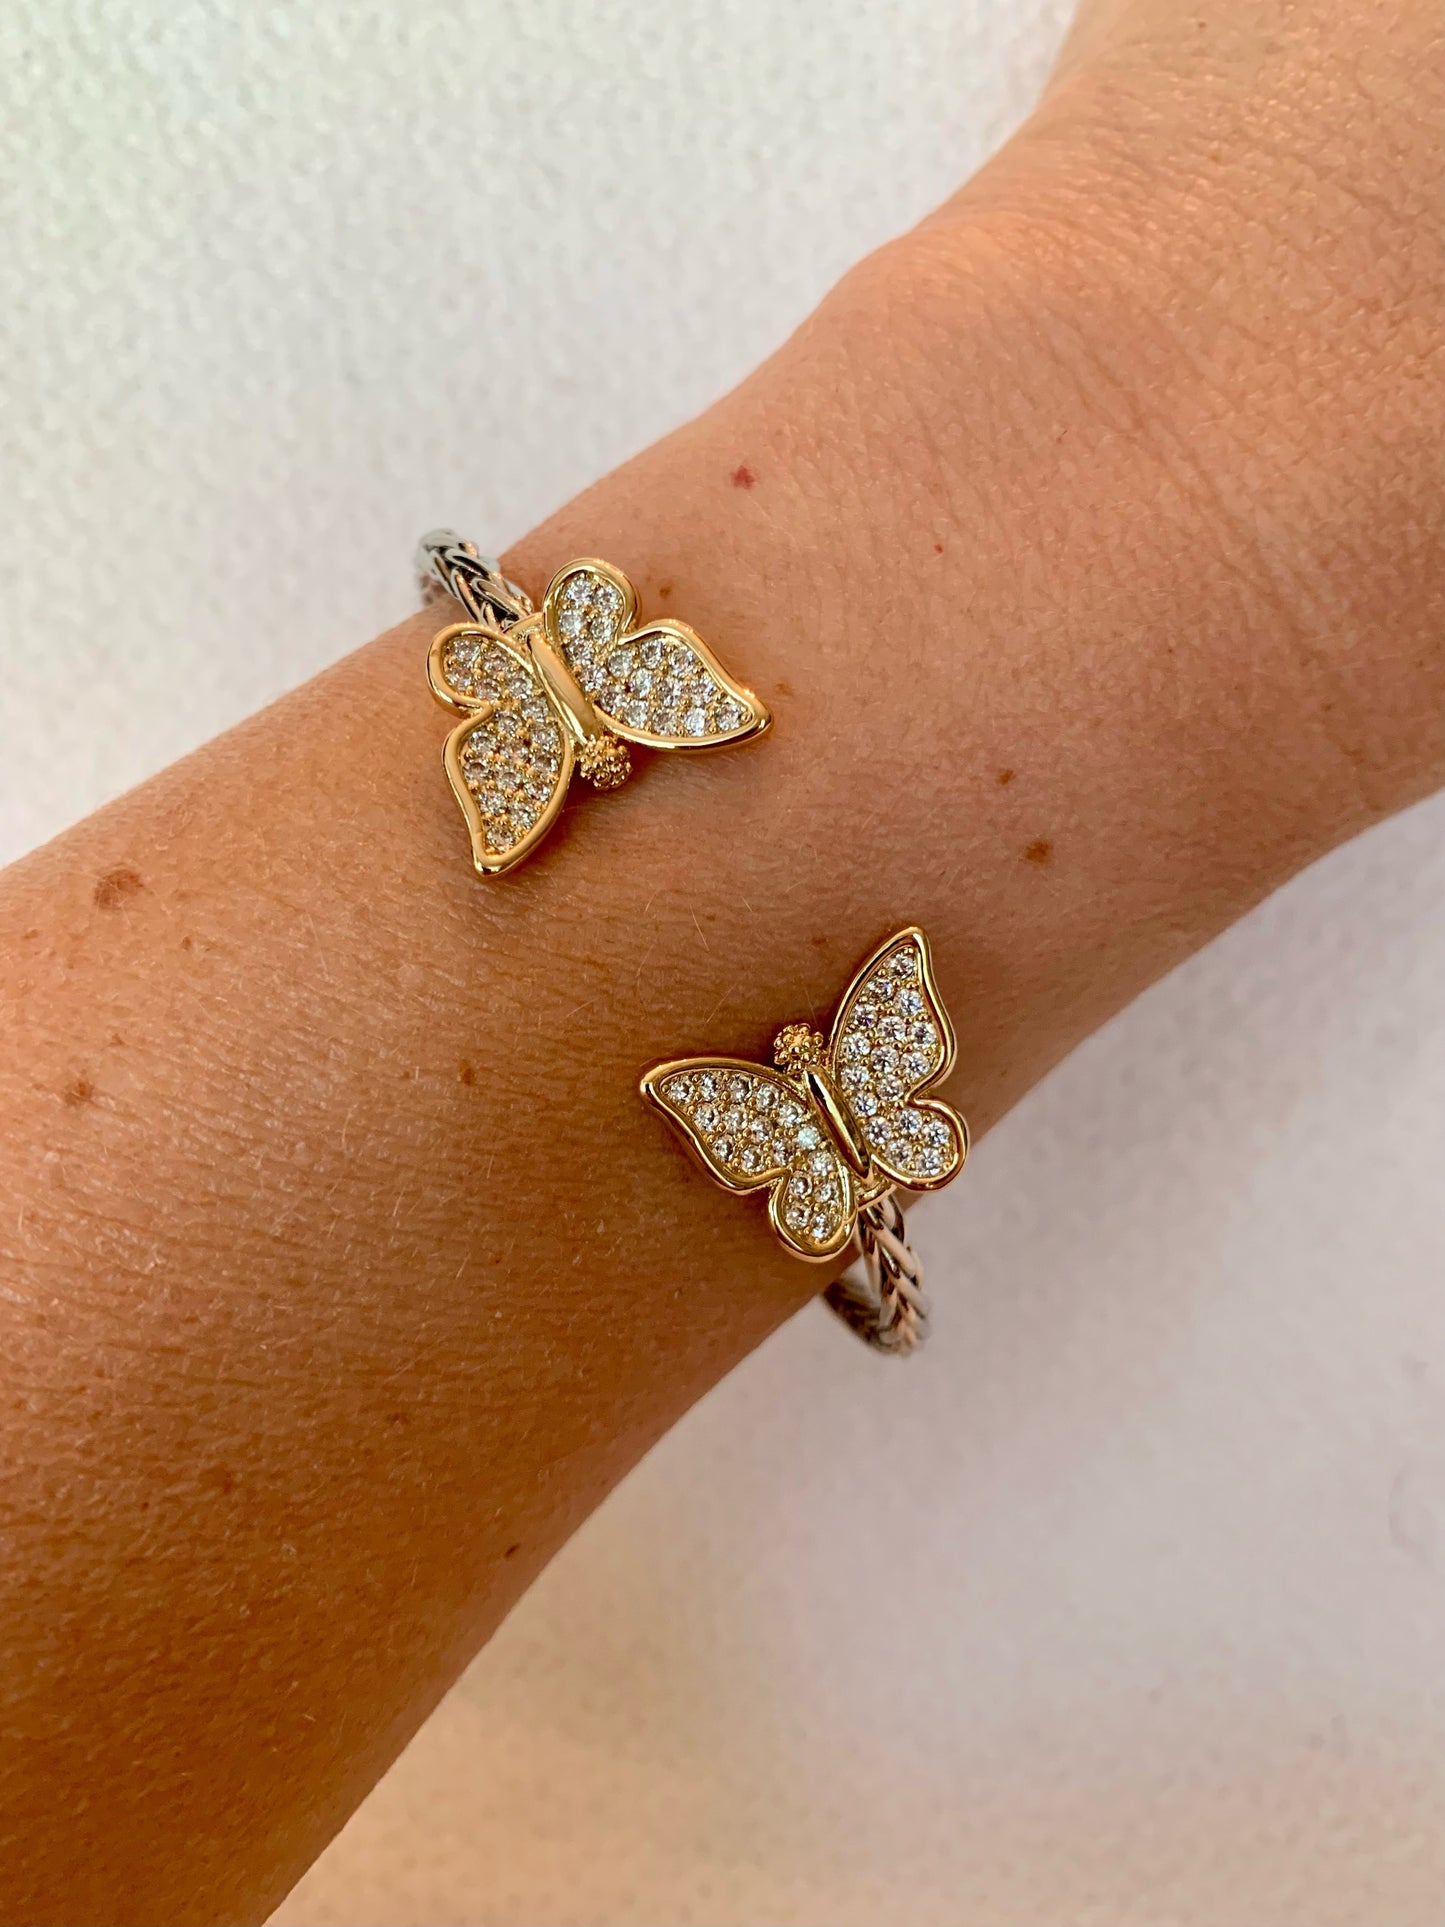 Silver and Gold Butterfly Bracelet with Rhinestone Detailing